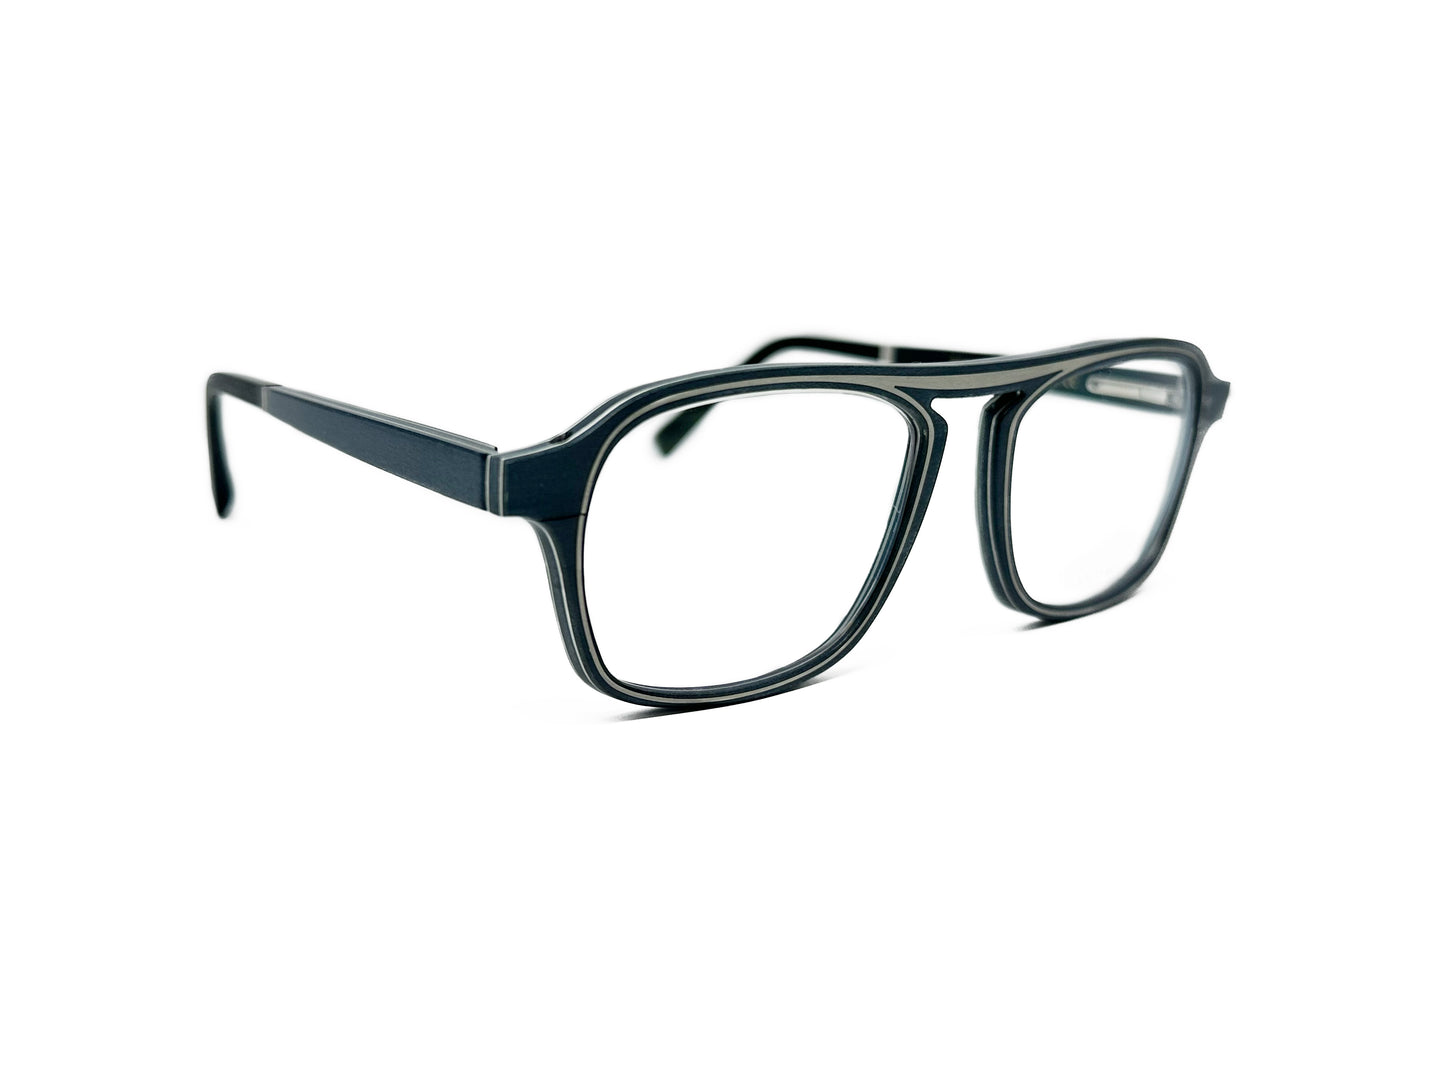 Gold & Wood aviator style optical frame, made from wood. Model: Eris. Color: 01.61 - Dark navy blue with grey trim. Side view.